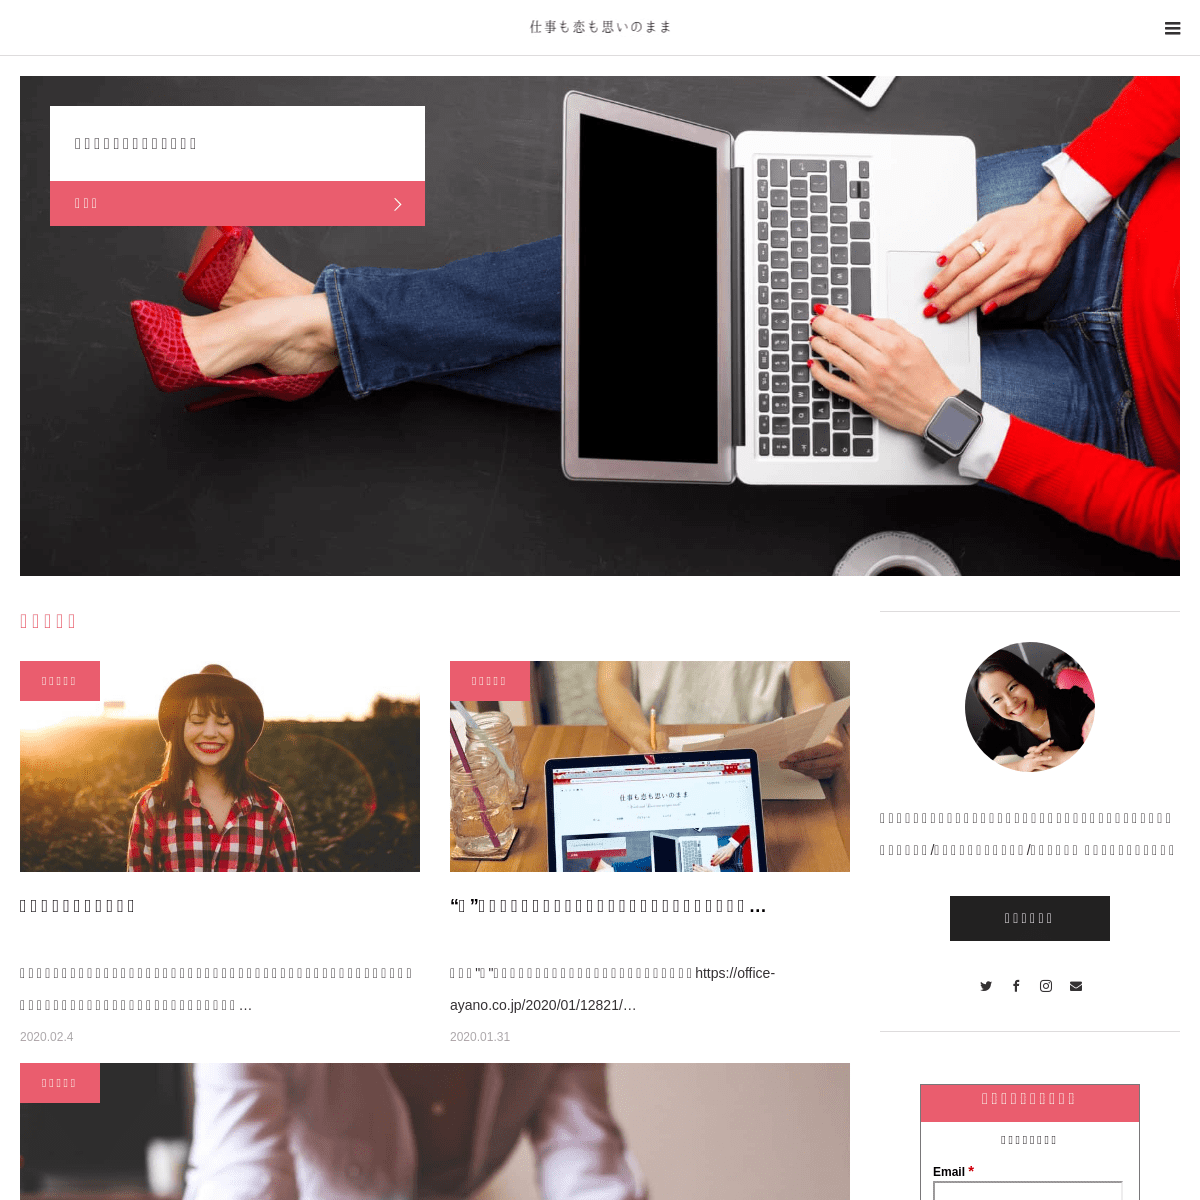 A complete backup of office-ayano.co.jp